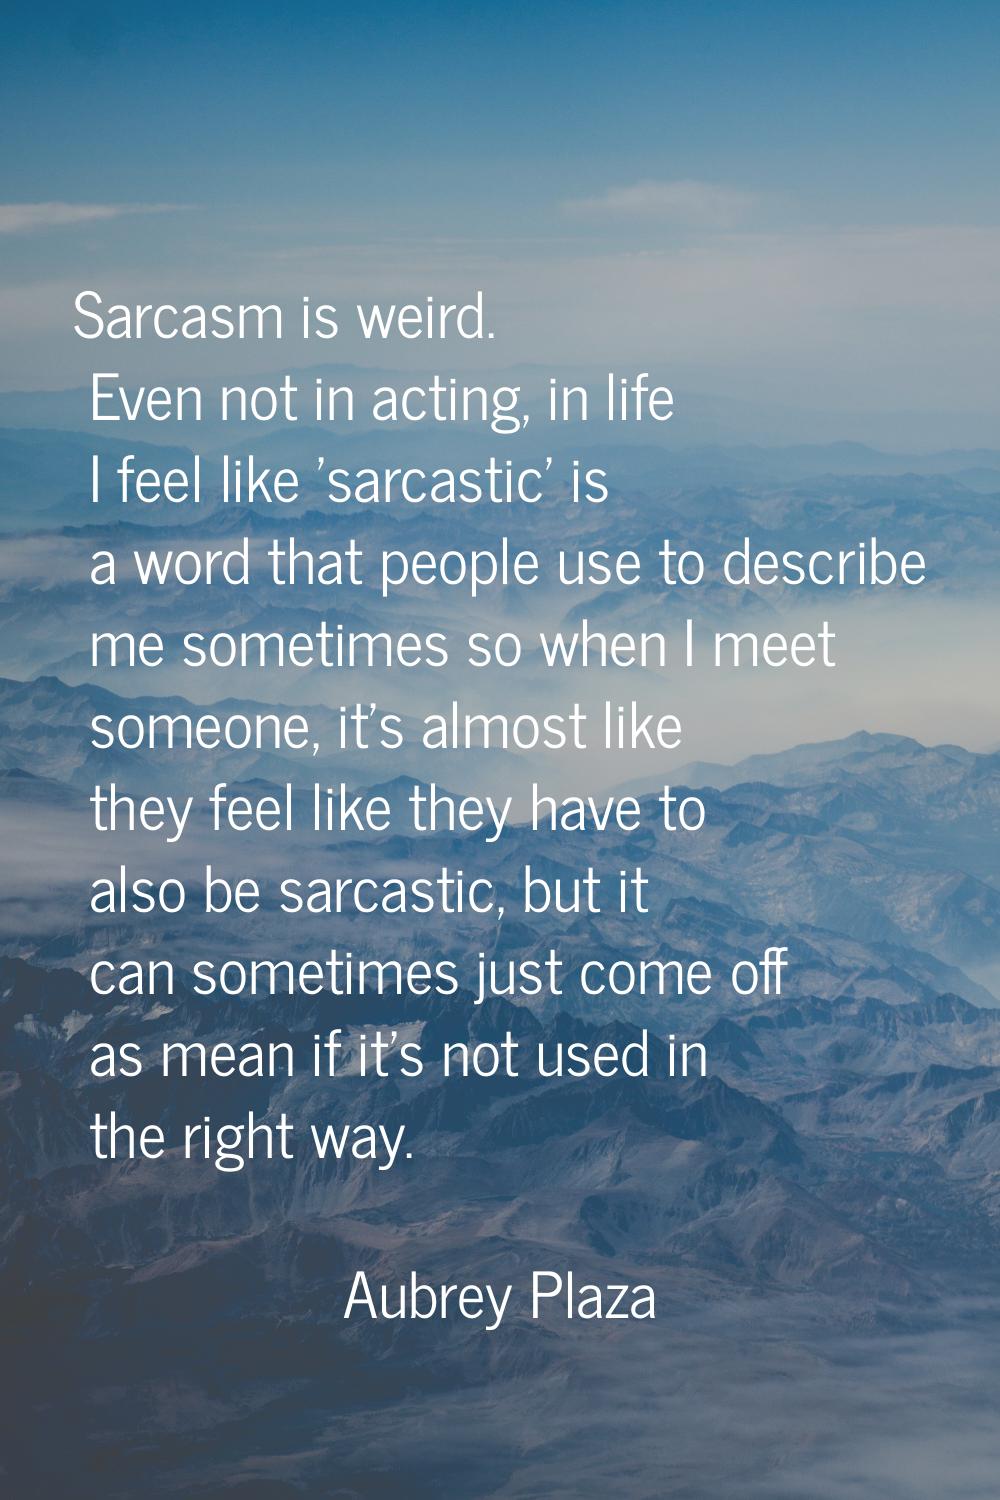 Sarcasm is weird. Even not in acting, in life I feel like 'sarcastic' is a word that people use to 